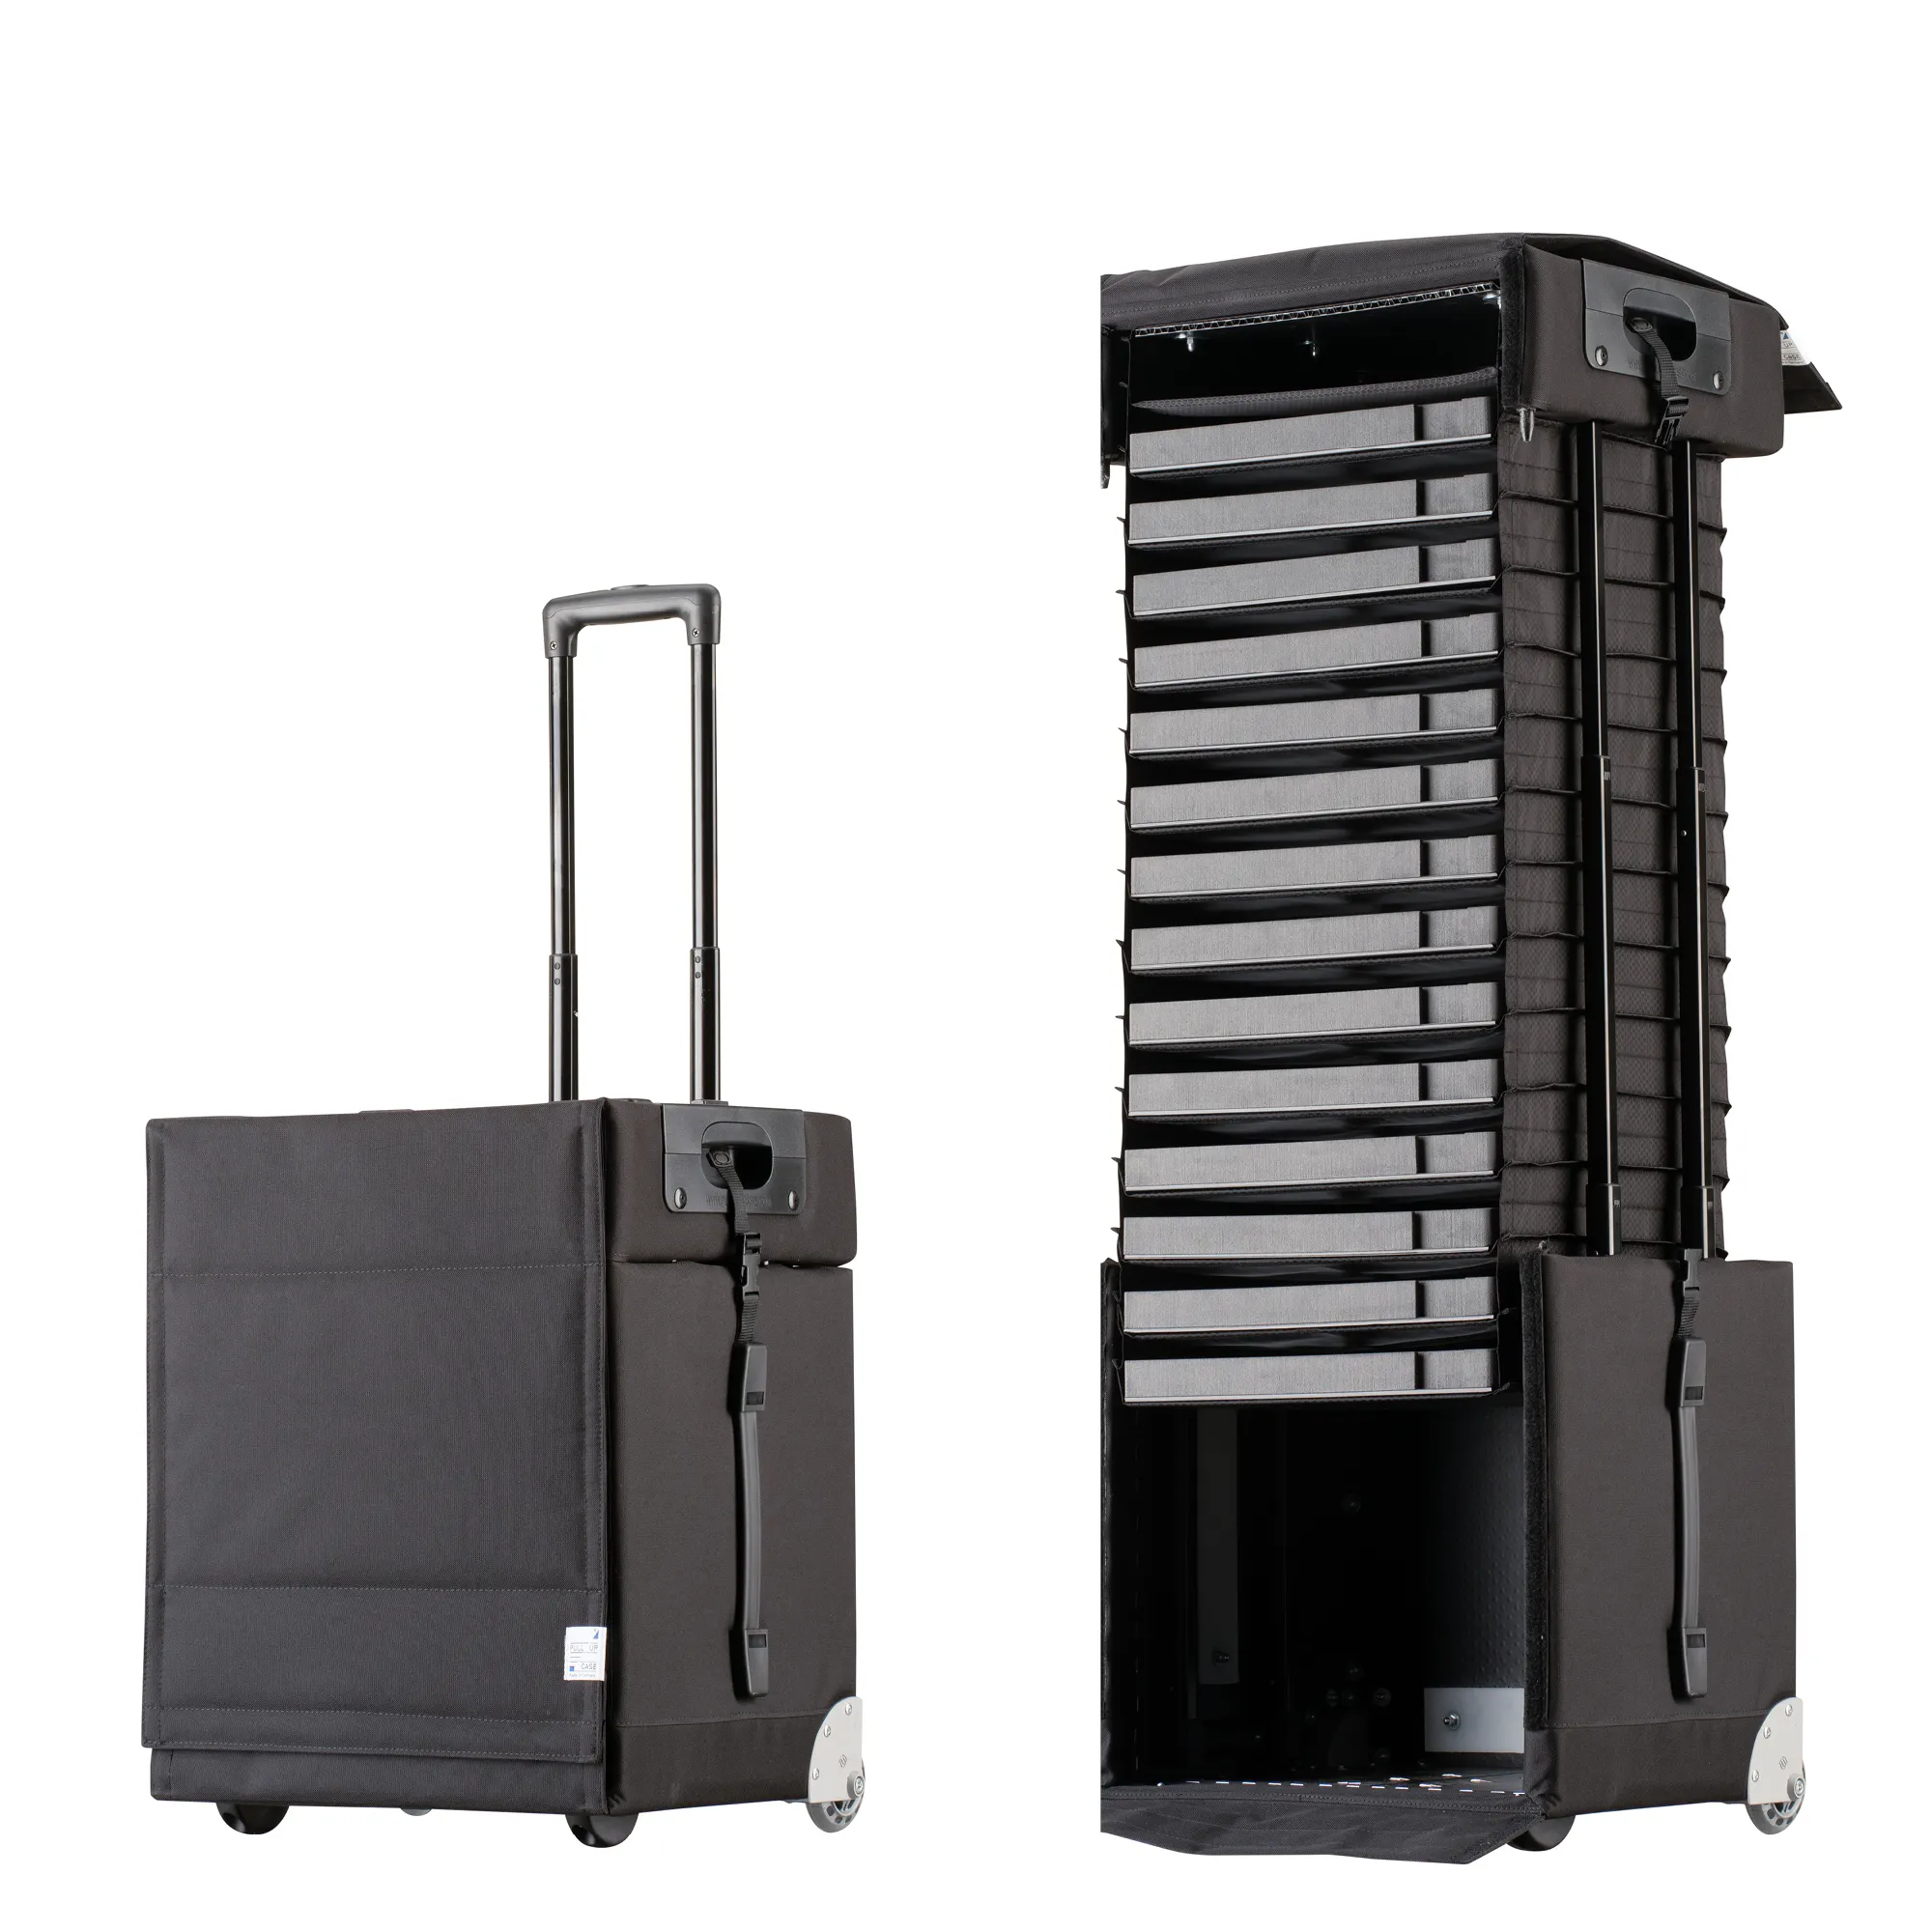 2020 Pull Up Samplecase Avantgarde 43L for Sunglasses / Trolley case / wheel case / foldable case - made in Germany